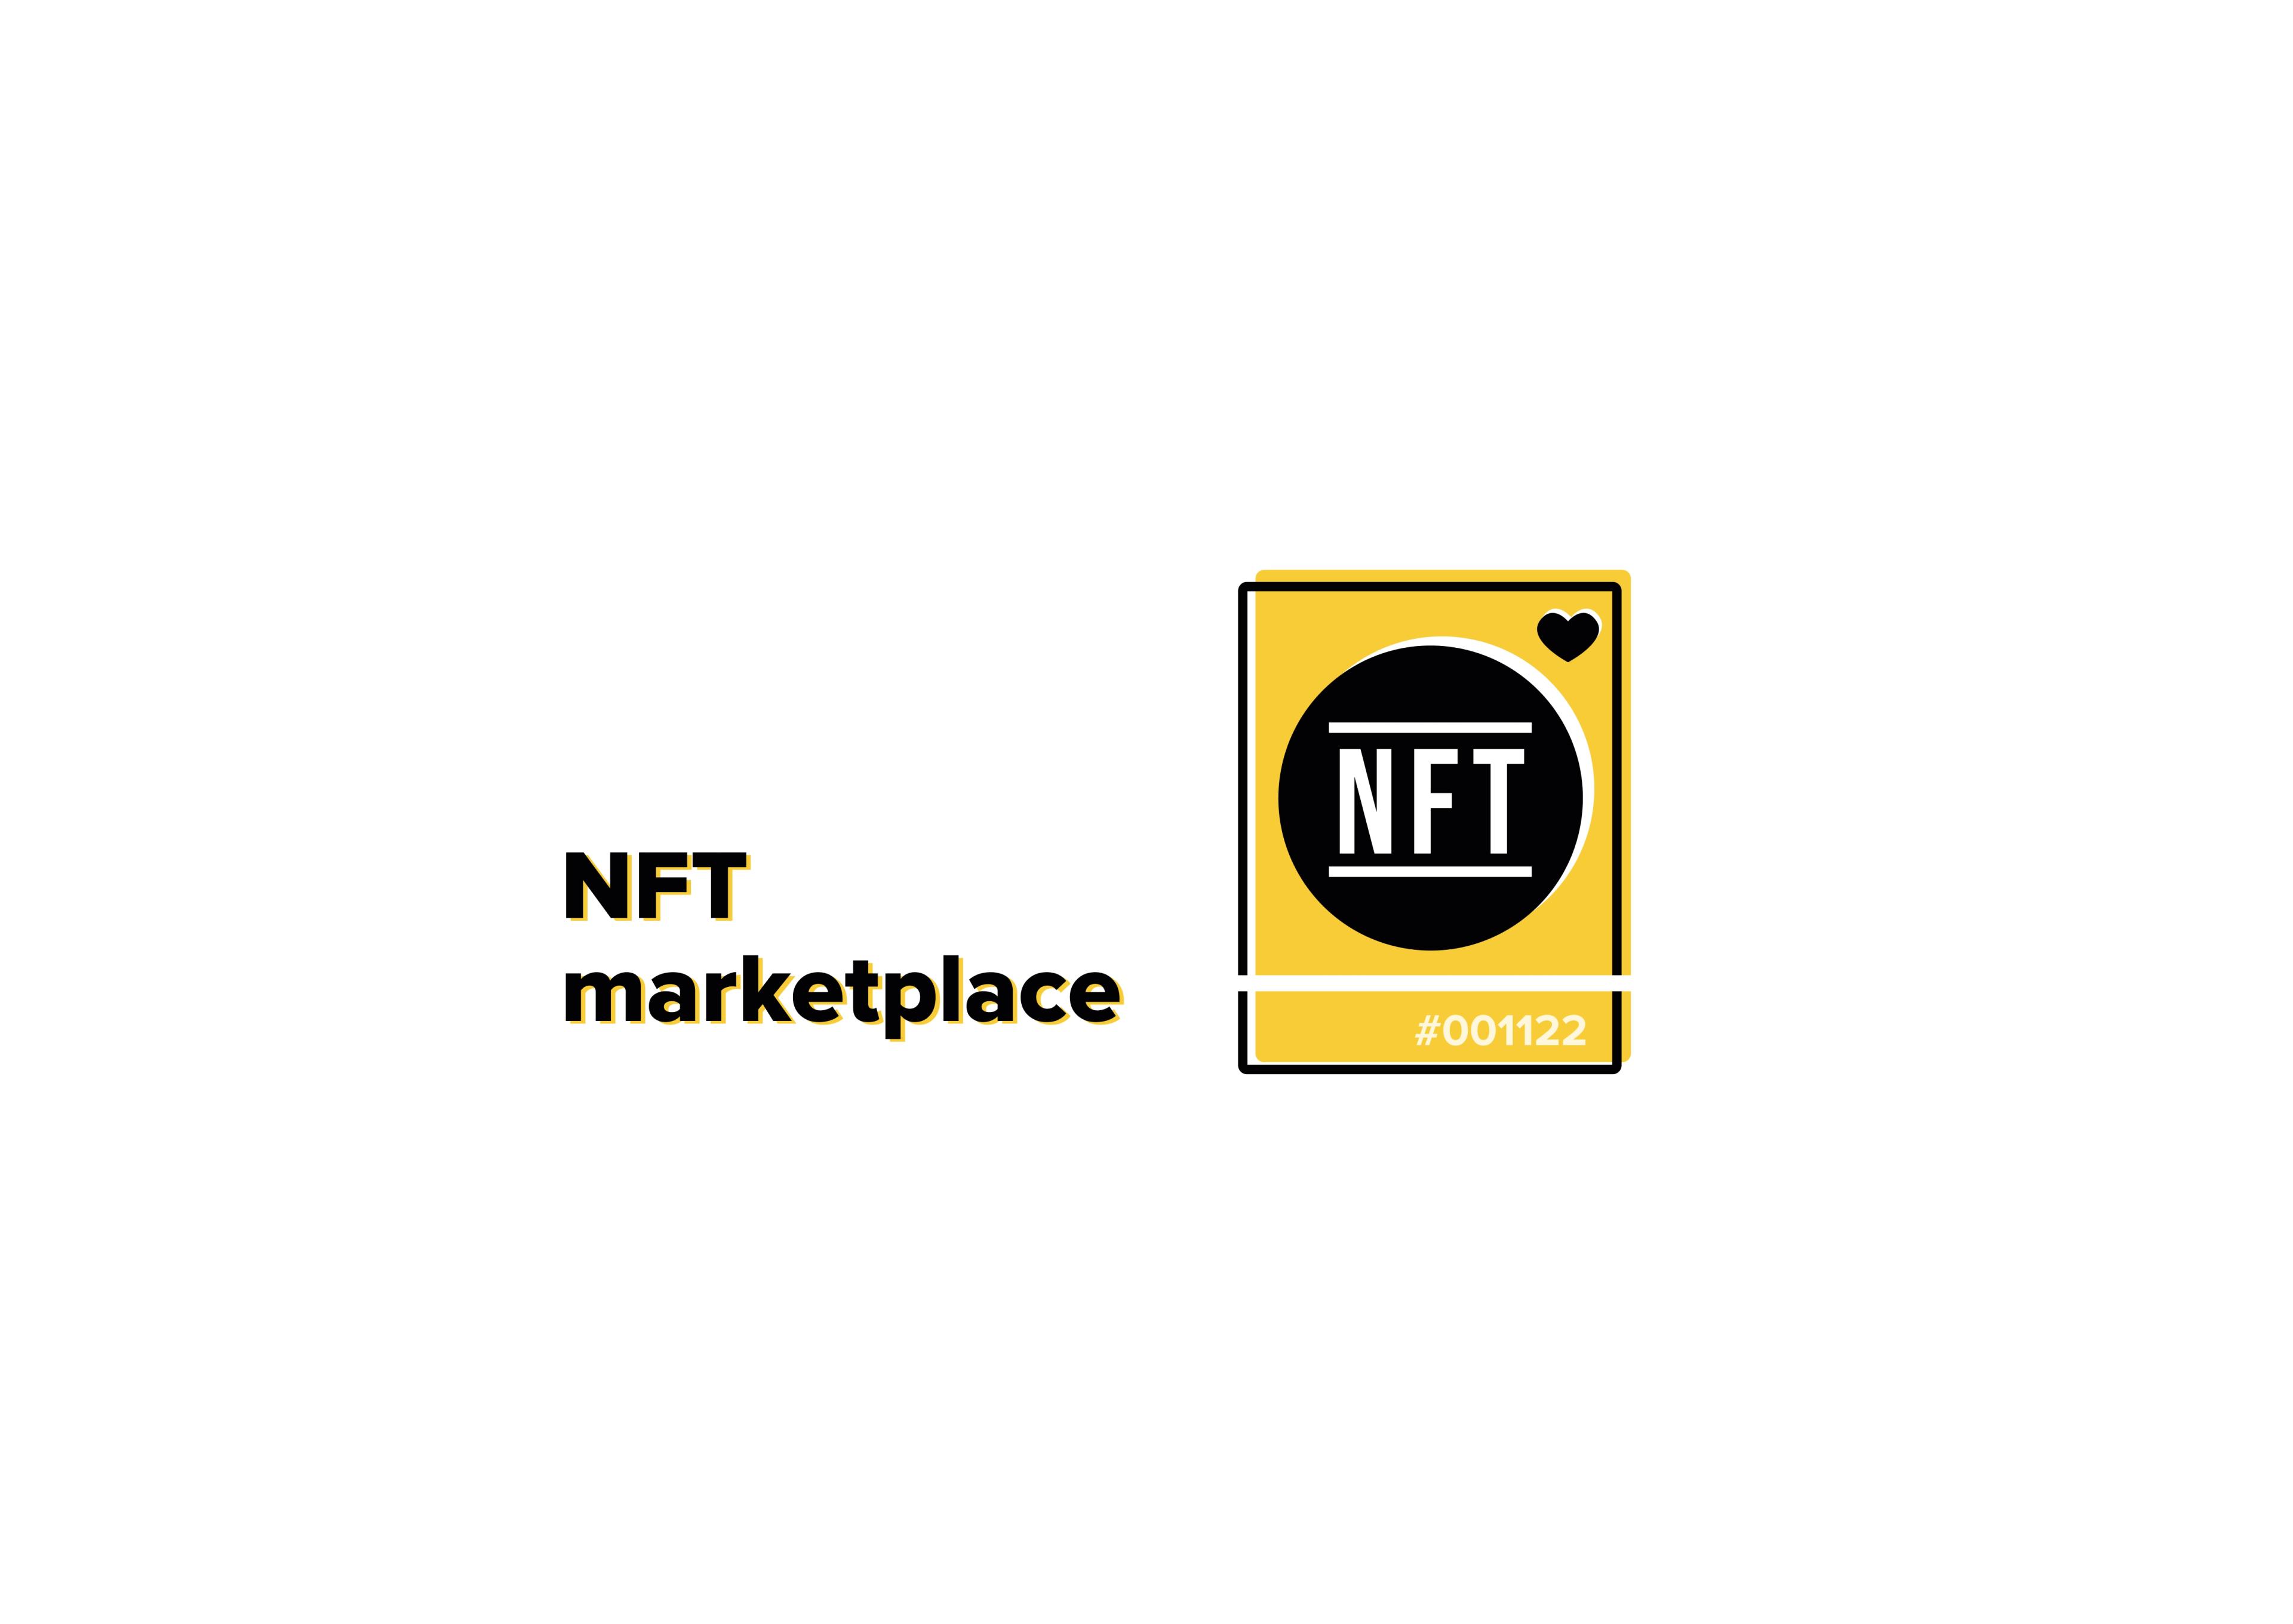 How to Create Your Own NFT Marketplace